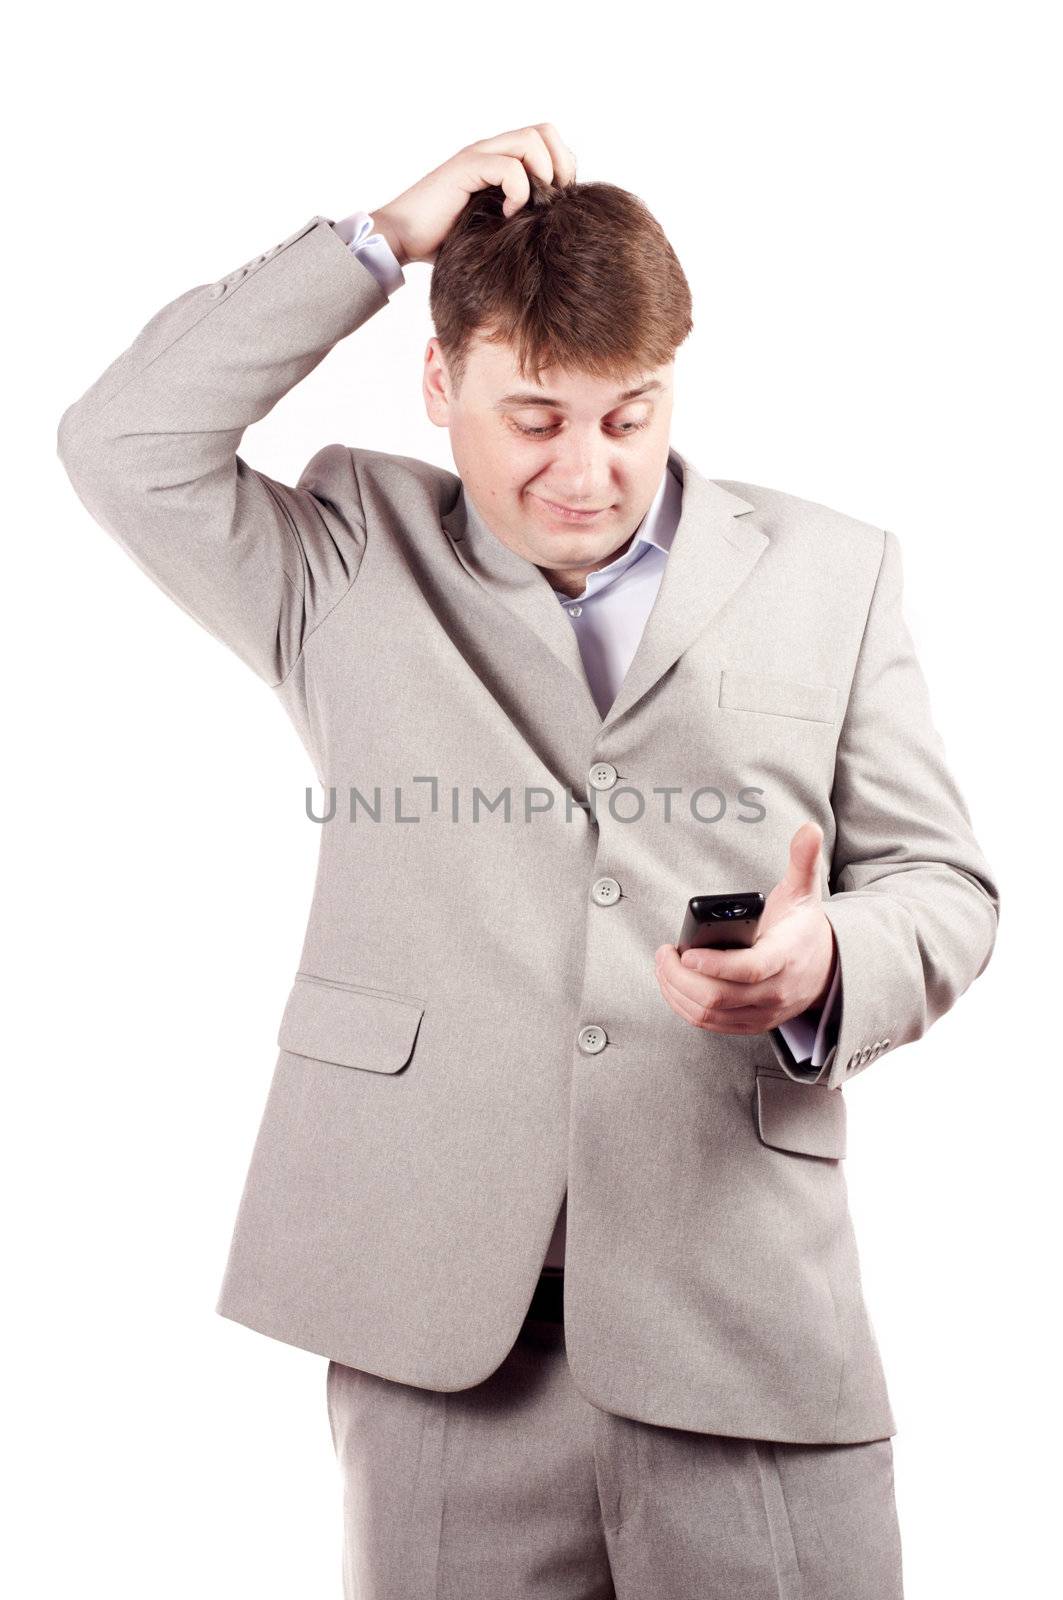 Man with remote control on a white background